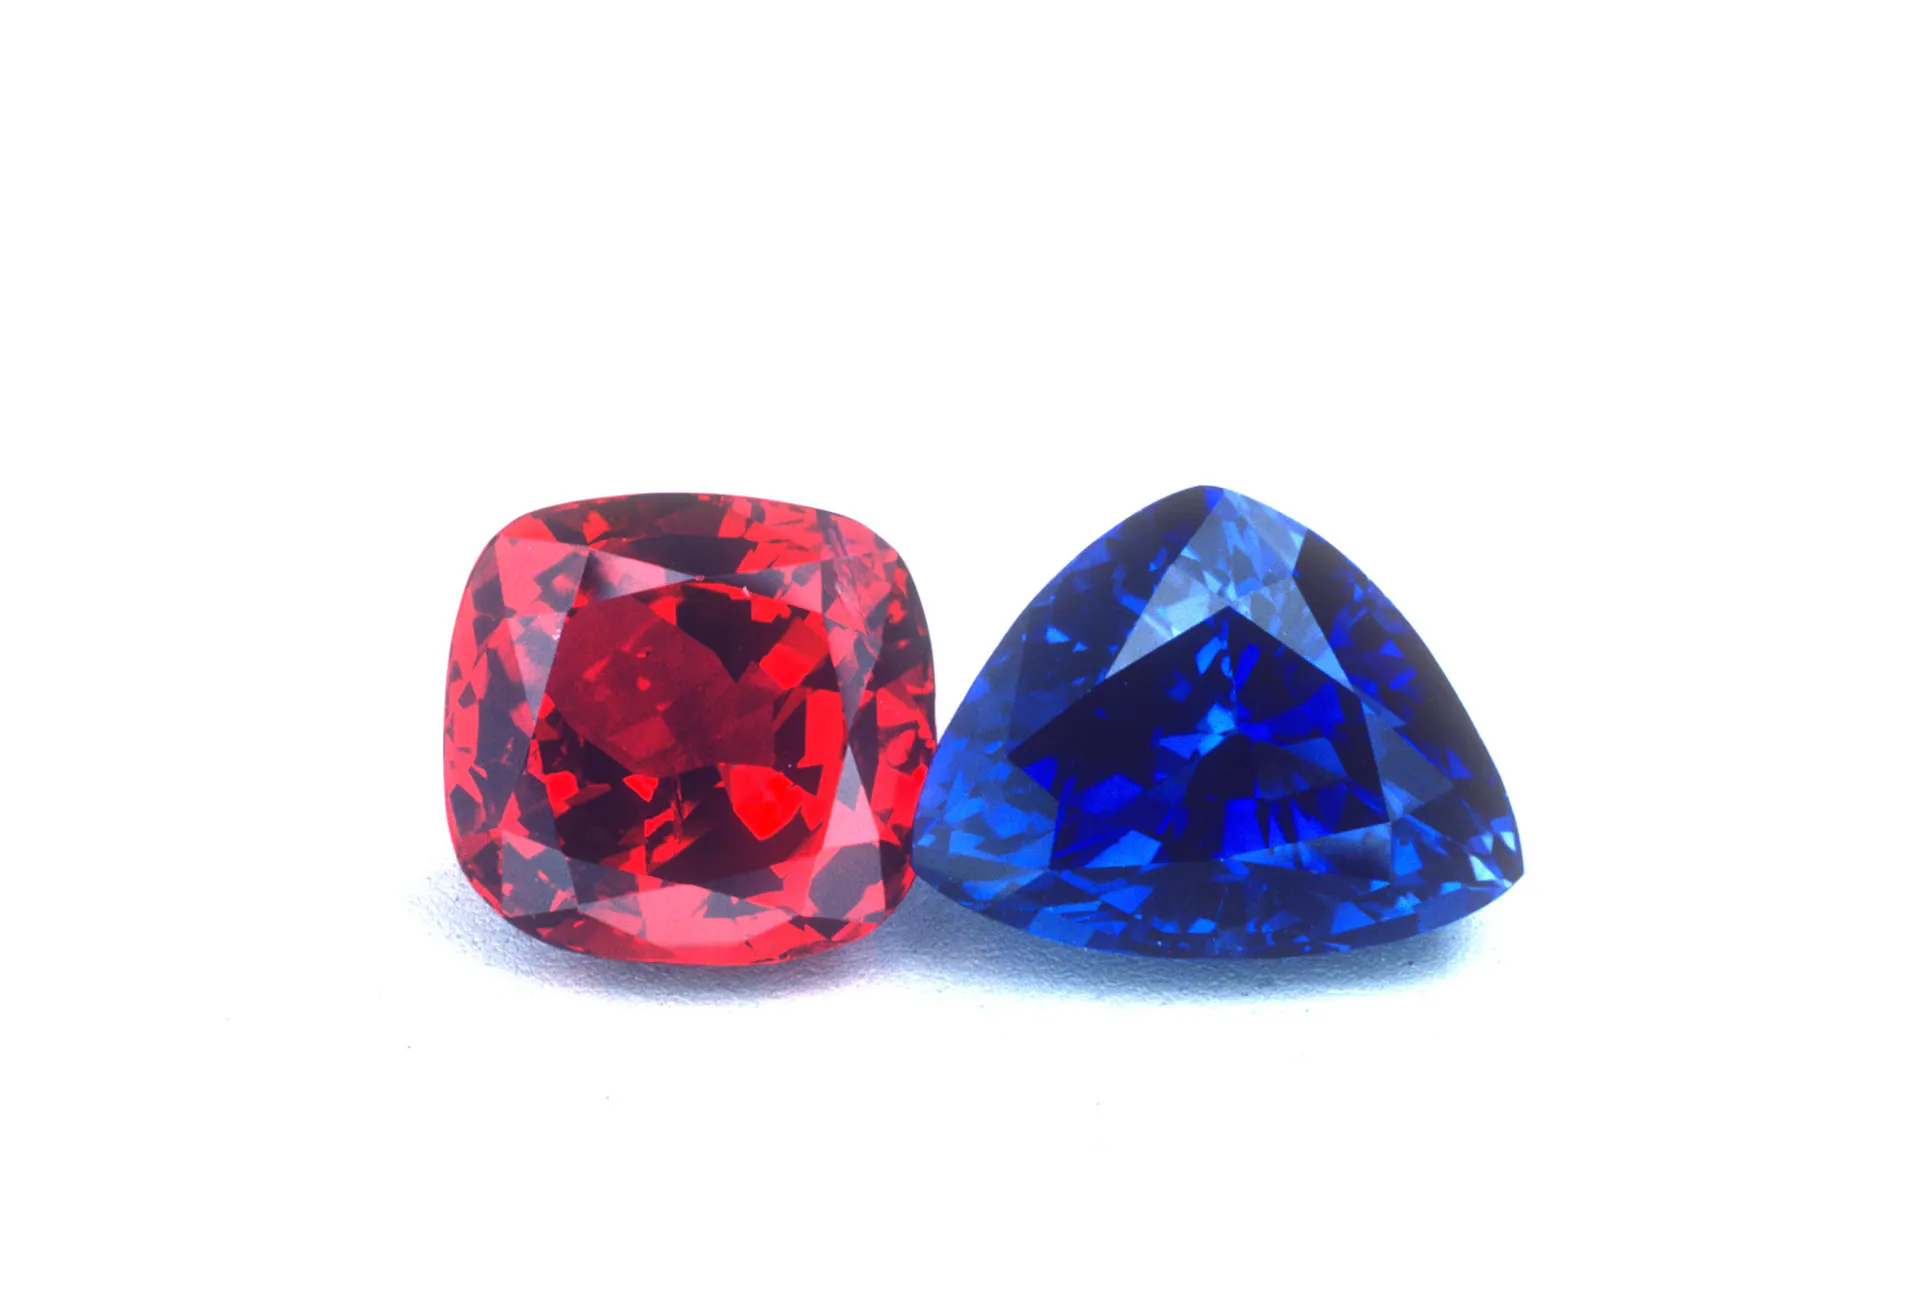 A Guide to Gem Classification